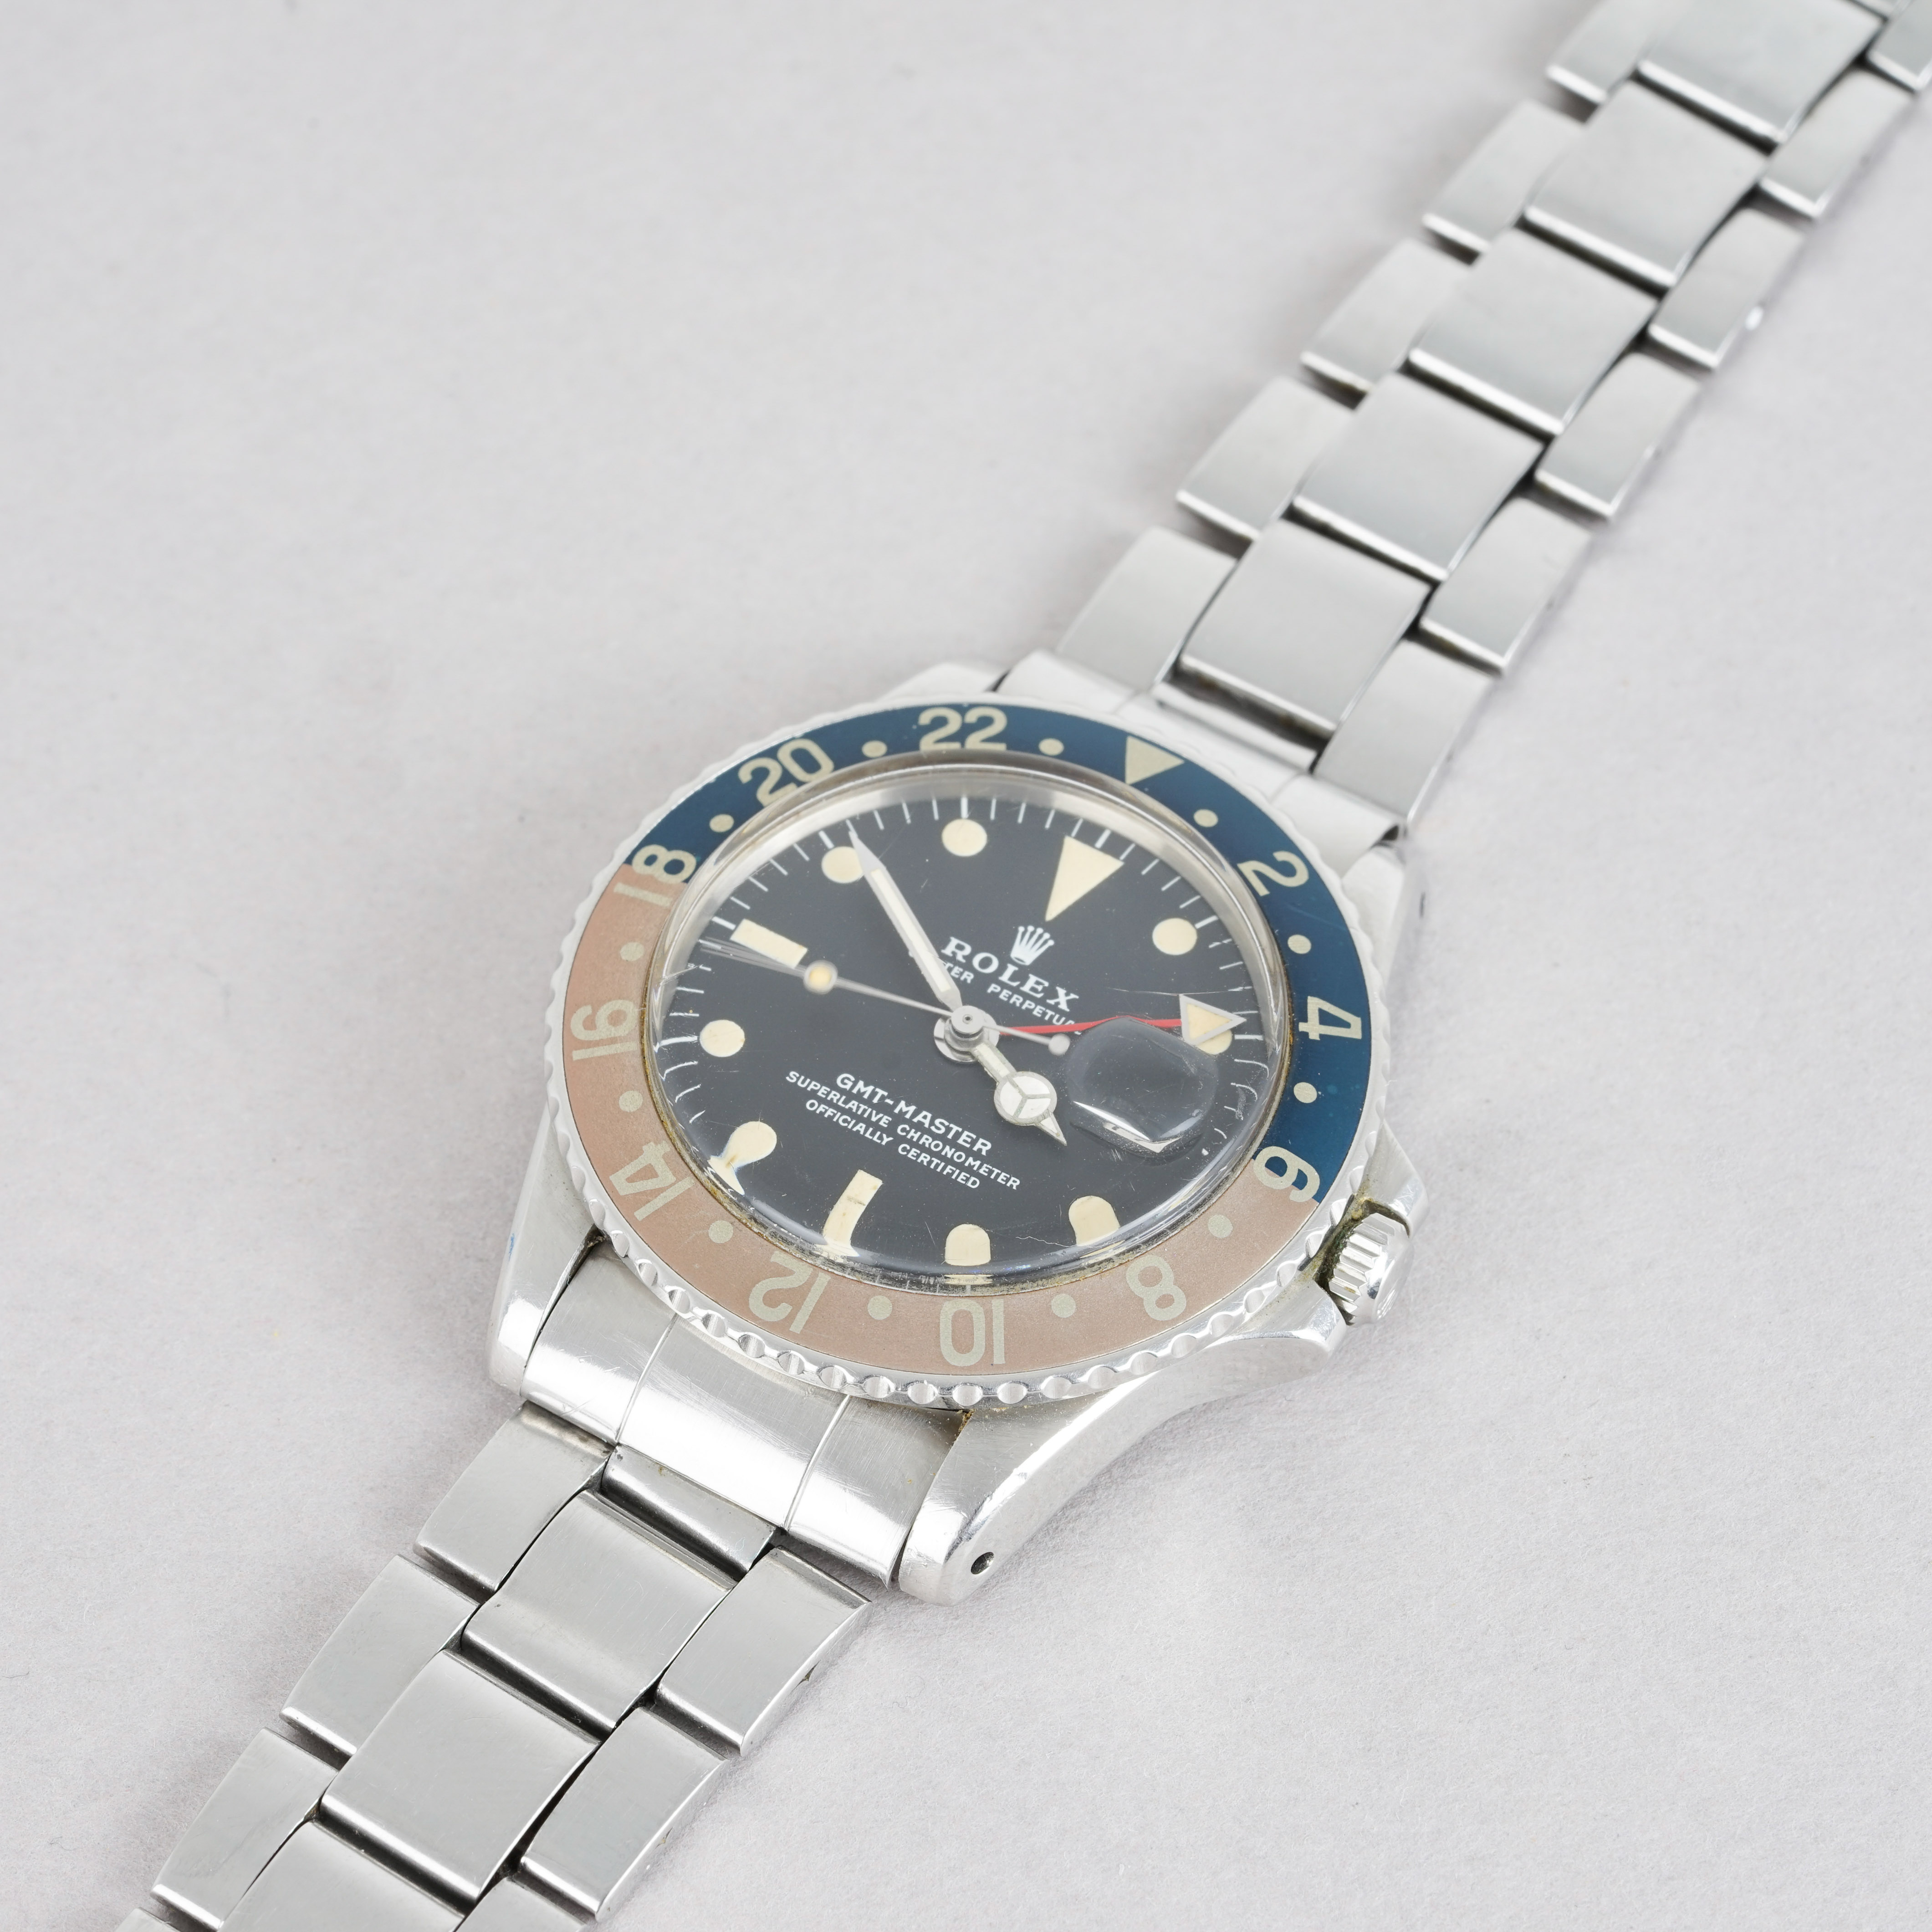 GENTLEMENS ROLEX OYSTER PERPETUAL DATE GMT MASTER PEPSI WRISTWATCH W/ BOX & GUARANTEE REF. 1675 - Image 2 of 4